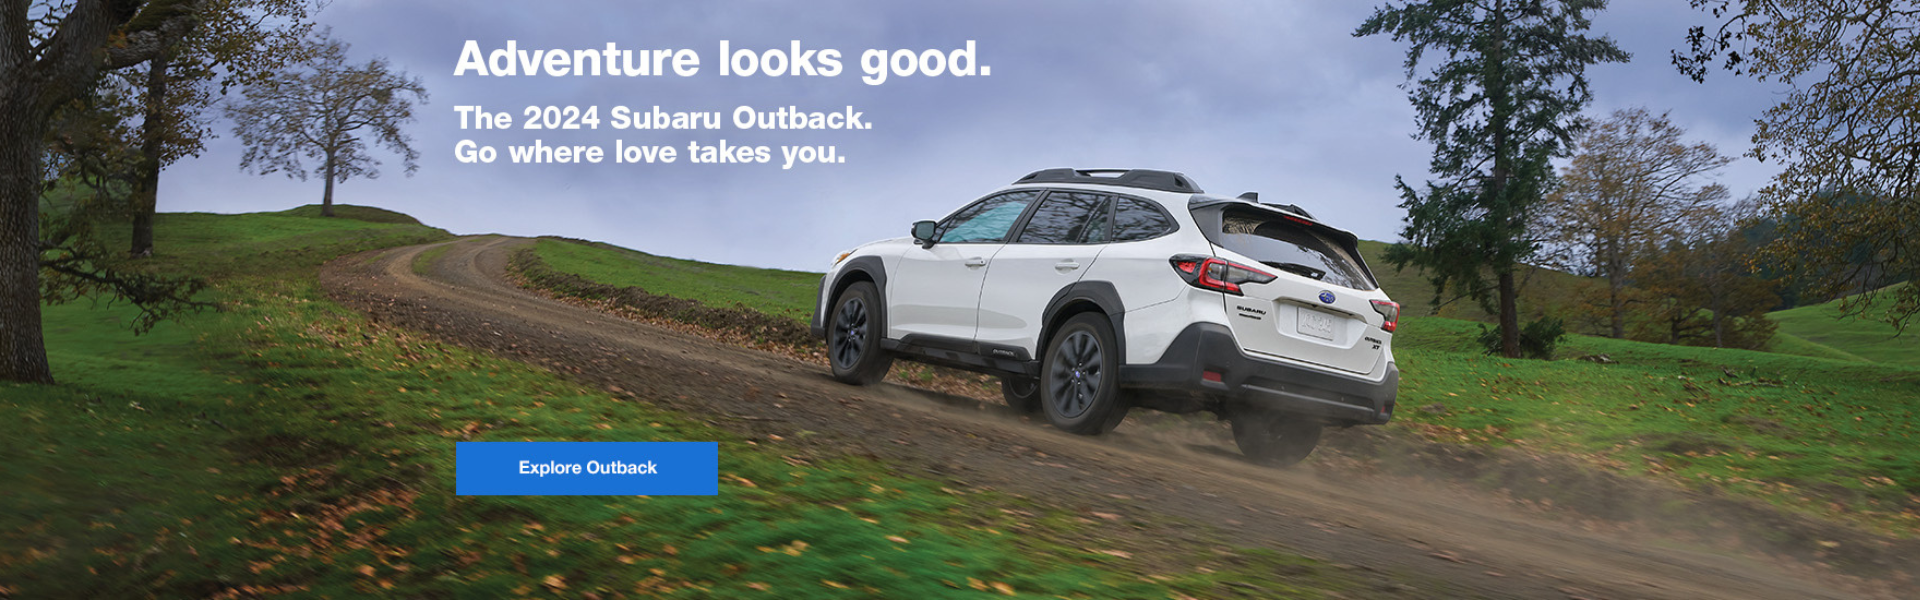 2023 Subarru Outback Wilderness banner for friends